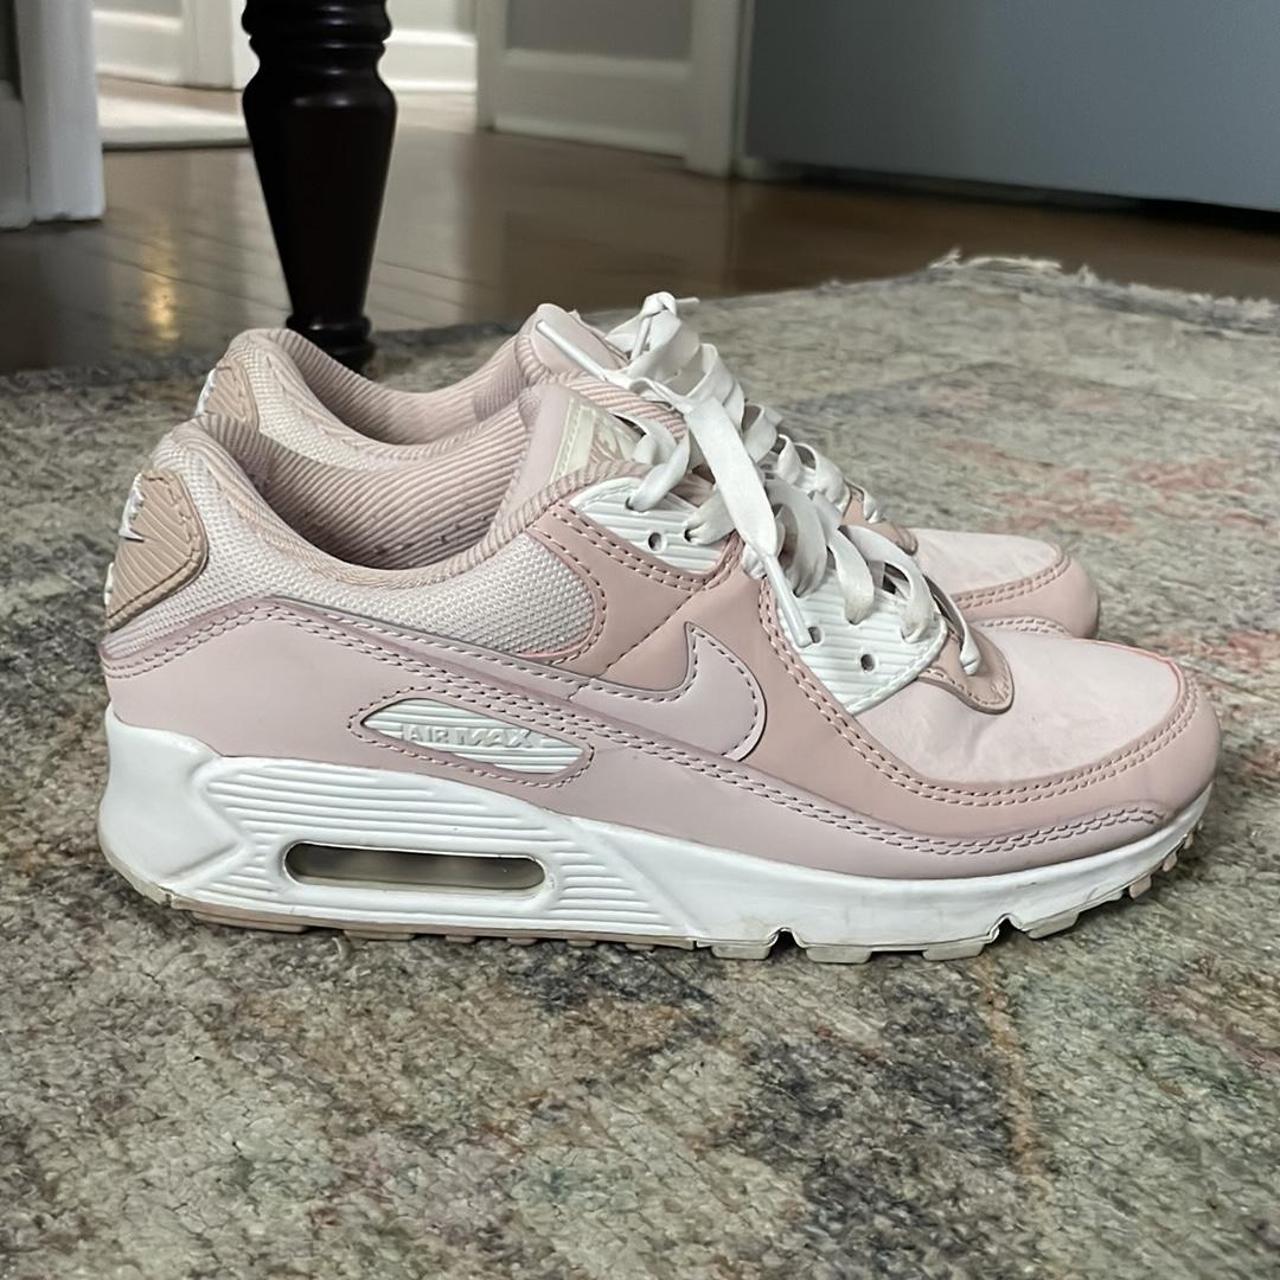 Nike Women's Pink and Cream Trainers